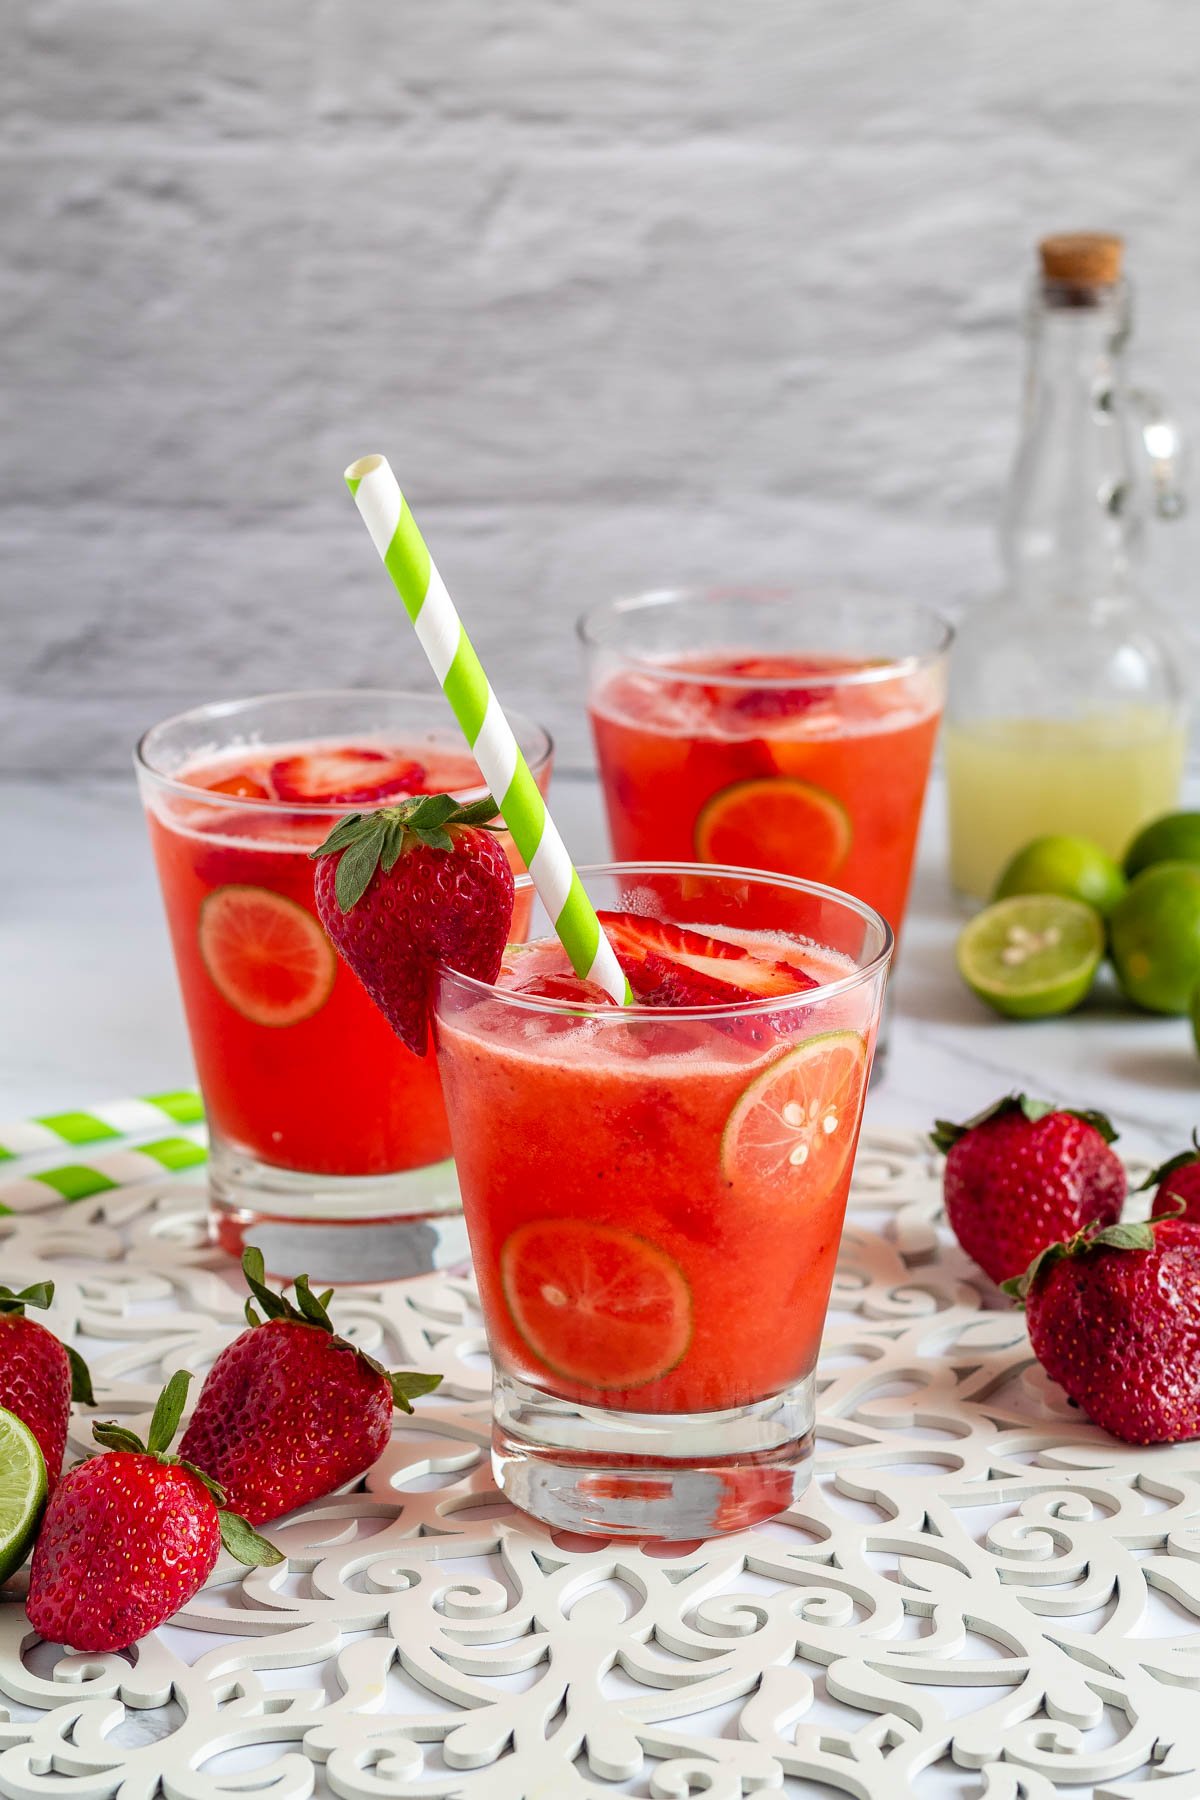 Strawberry limemade poured up into three glasses with a straw in the front glass.